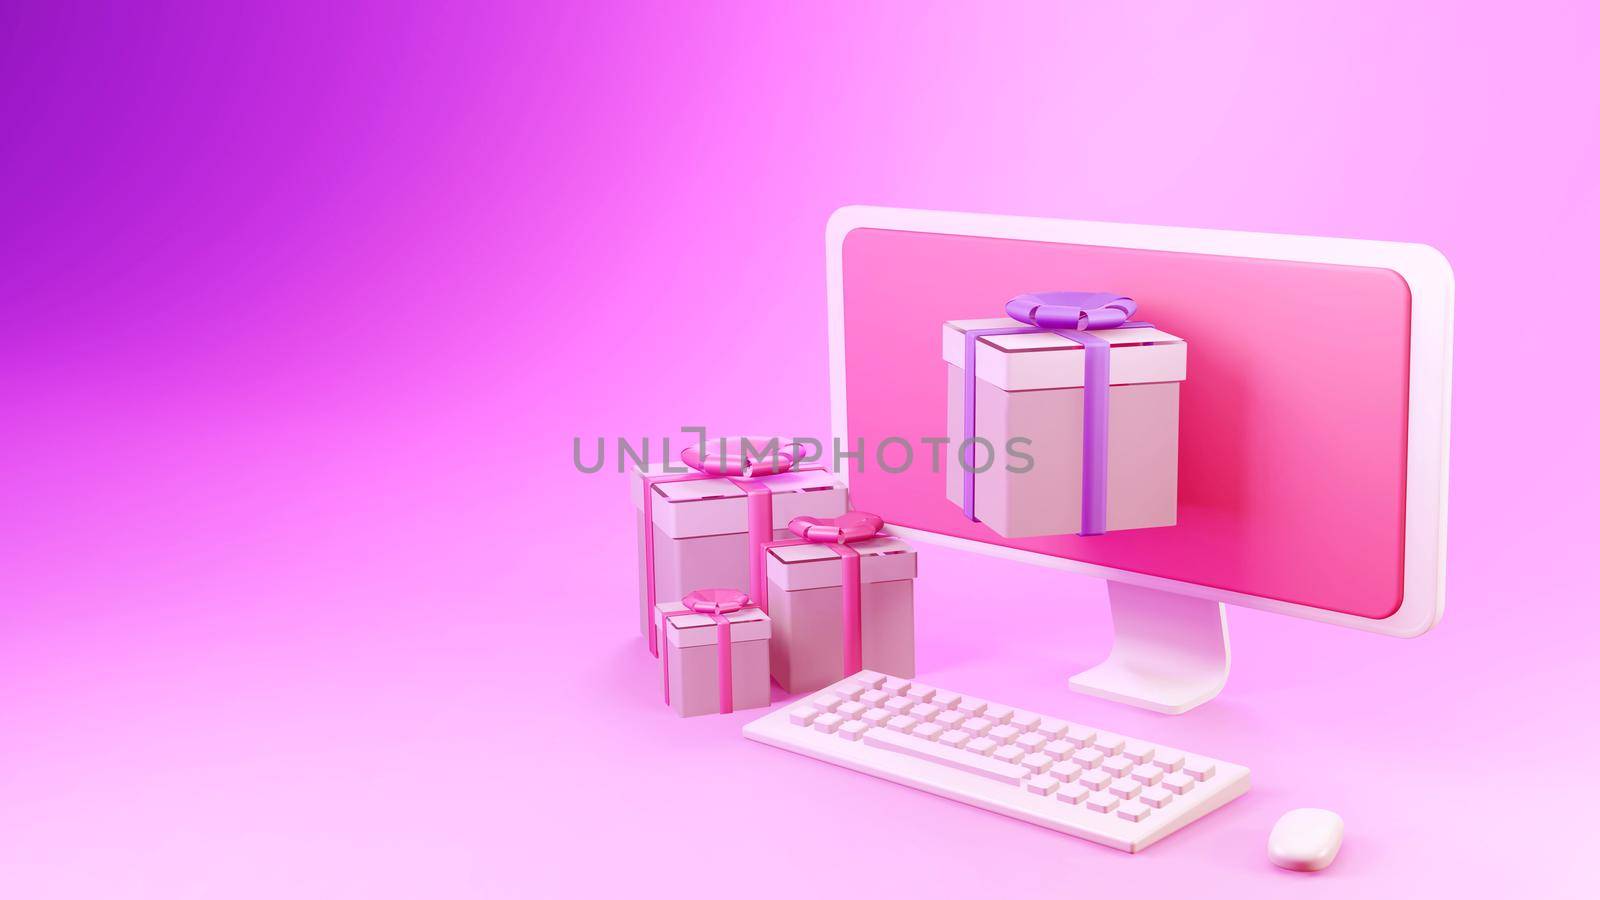 Abstract special occasion gift box computer hardware device displaying various online trading information, currency exchange, isolated minimalist background. There is copy space for 3D rendering. by noppha80